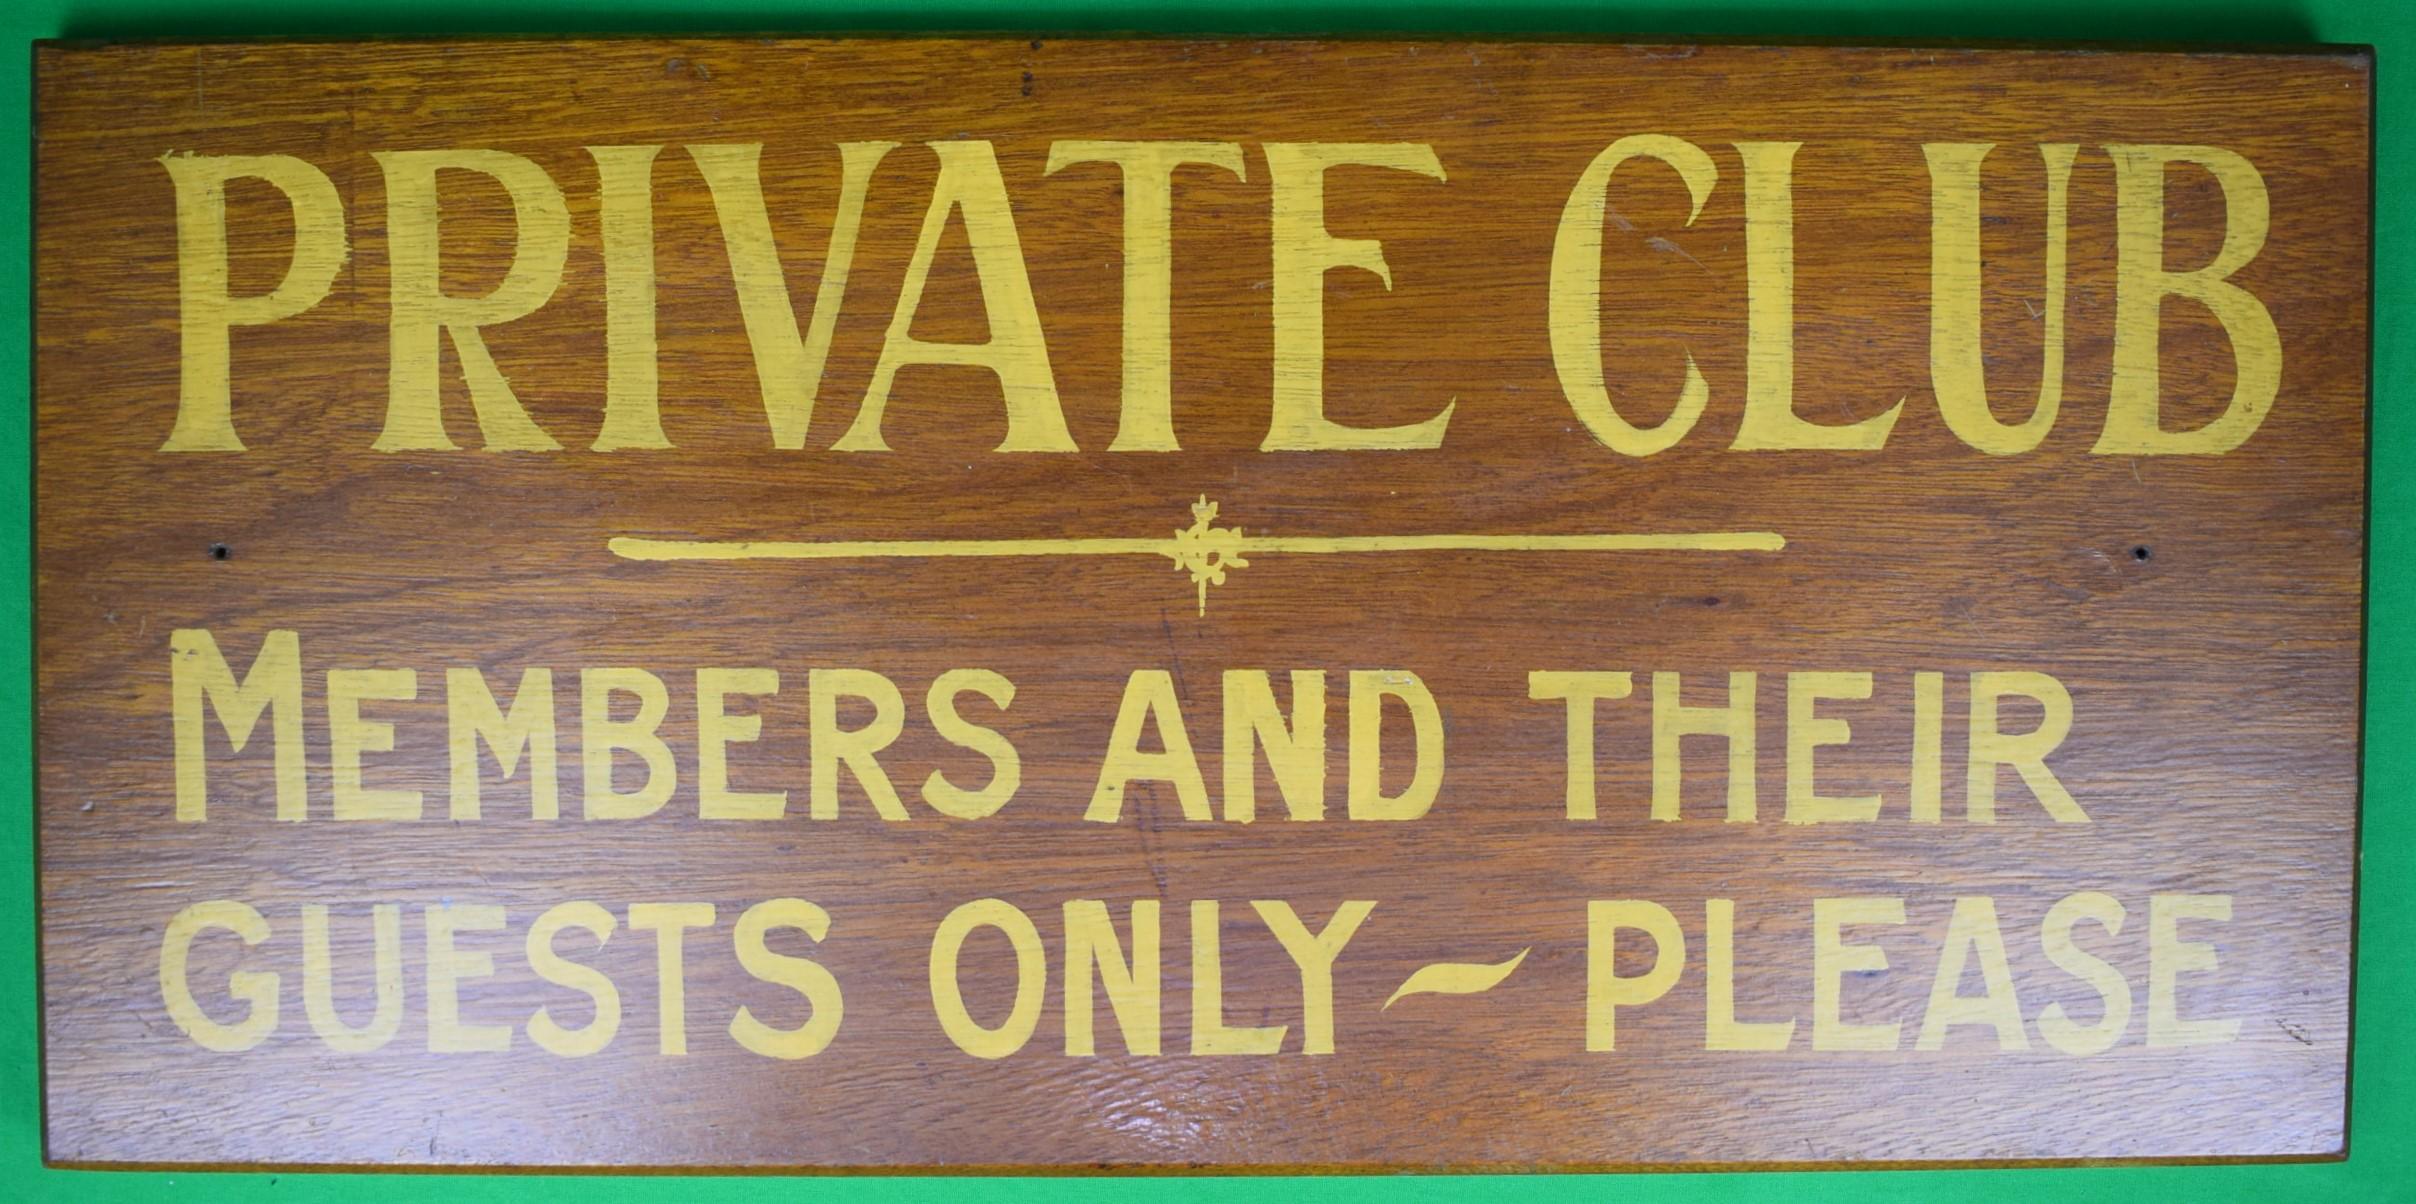 "Private Club Members And Their Guests Only ~ Please" Hand-Painted Wooden Sign - Mixed Media Art by Unknown